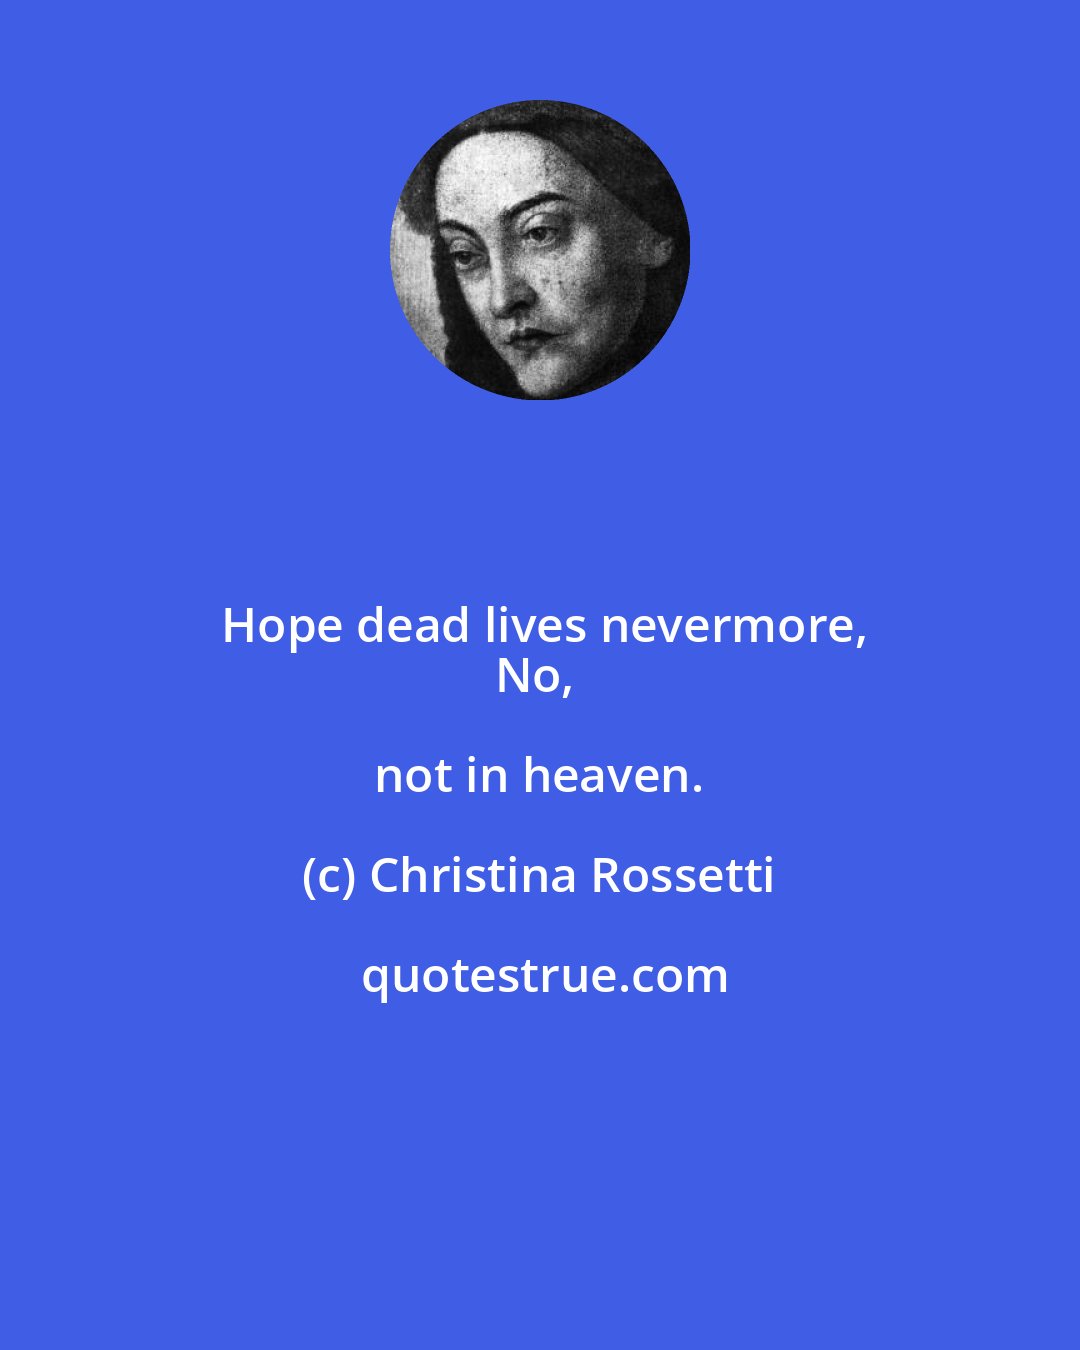 Christina Rossetti: Hope dead lives nevermore,
No, not in heaven.